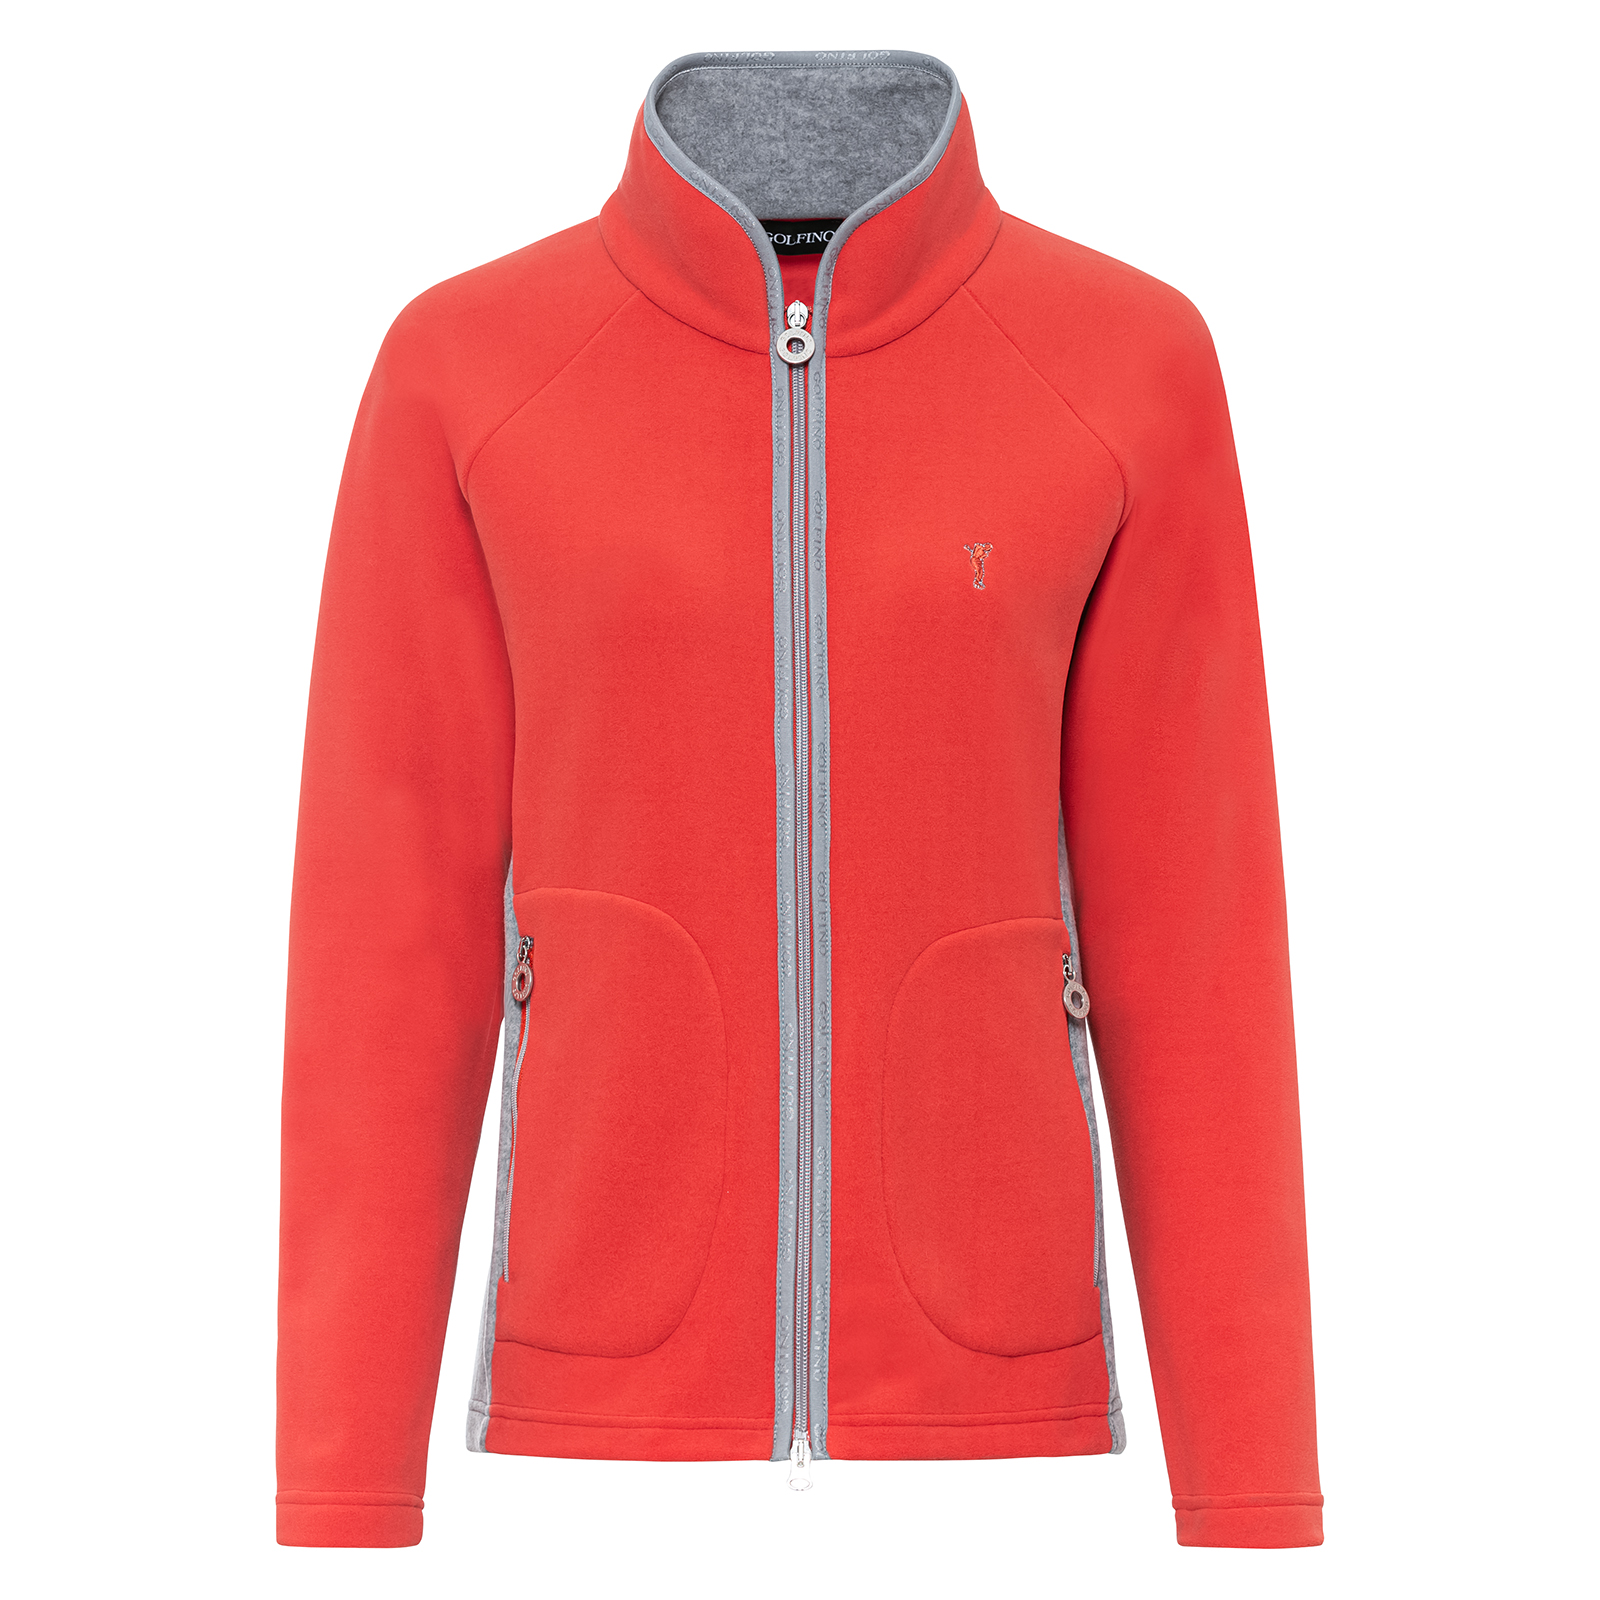 Ladies' modern fleece golf jacket with cold weather protection